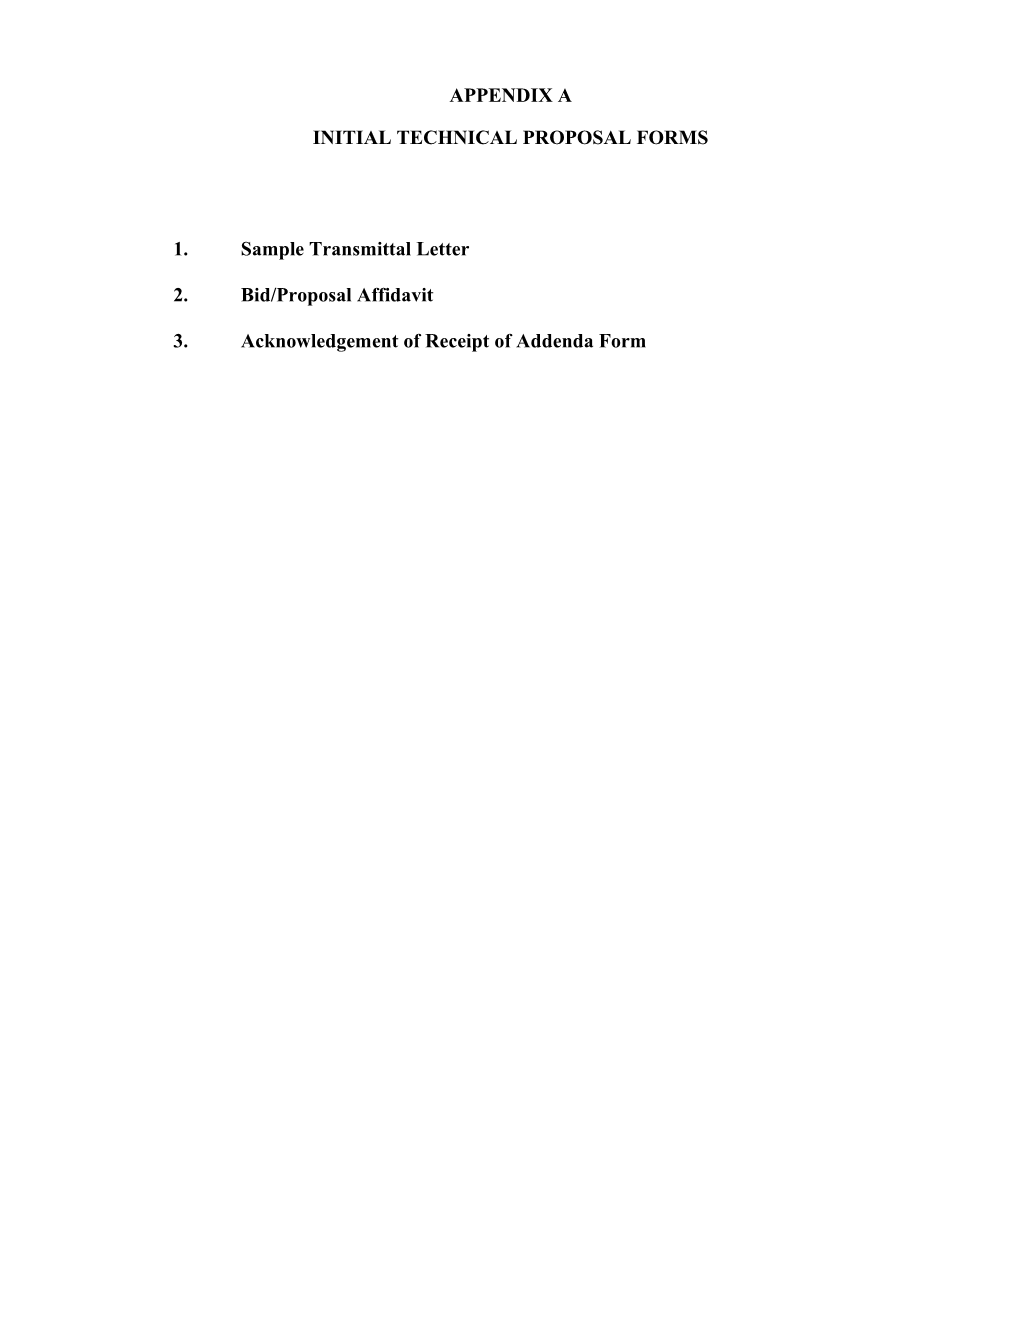 Initial Technical Proposal Forms